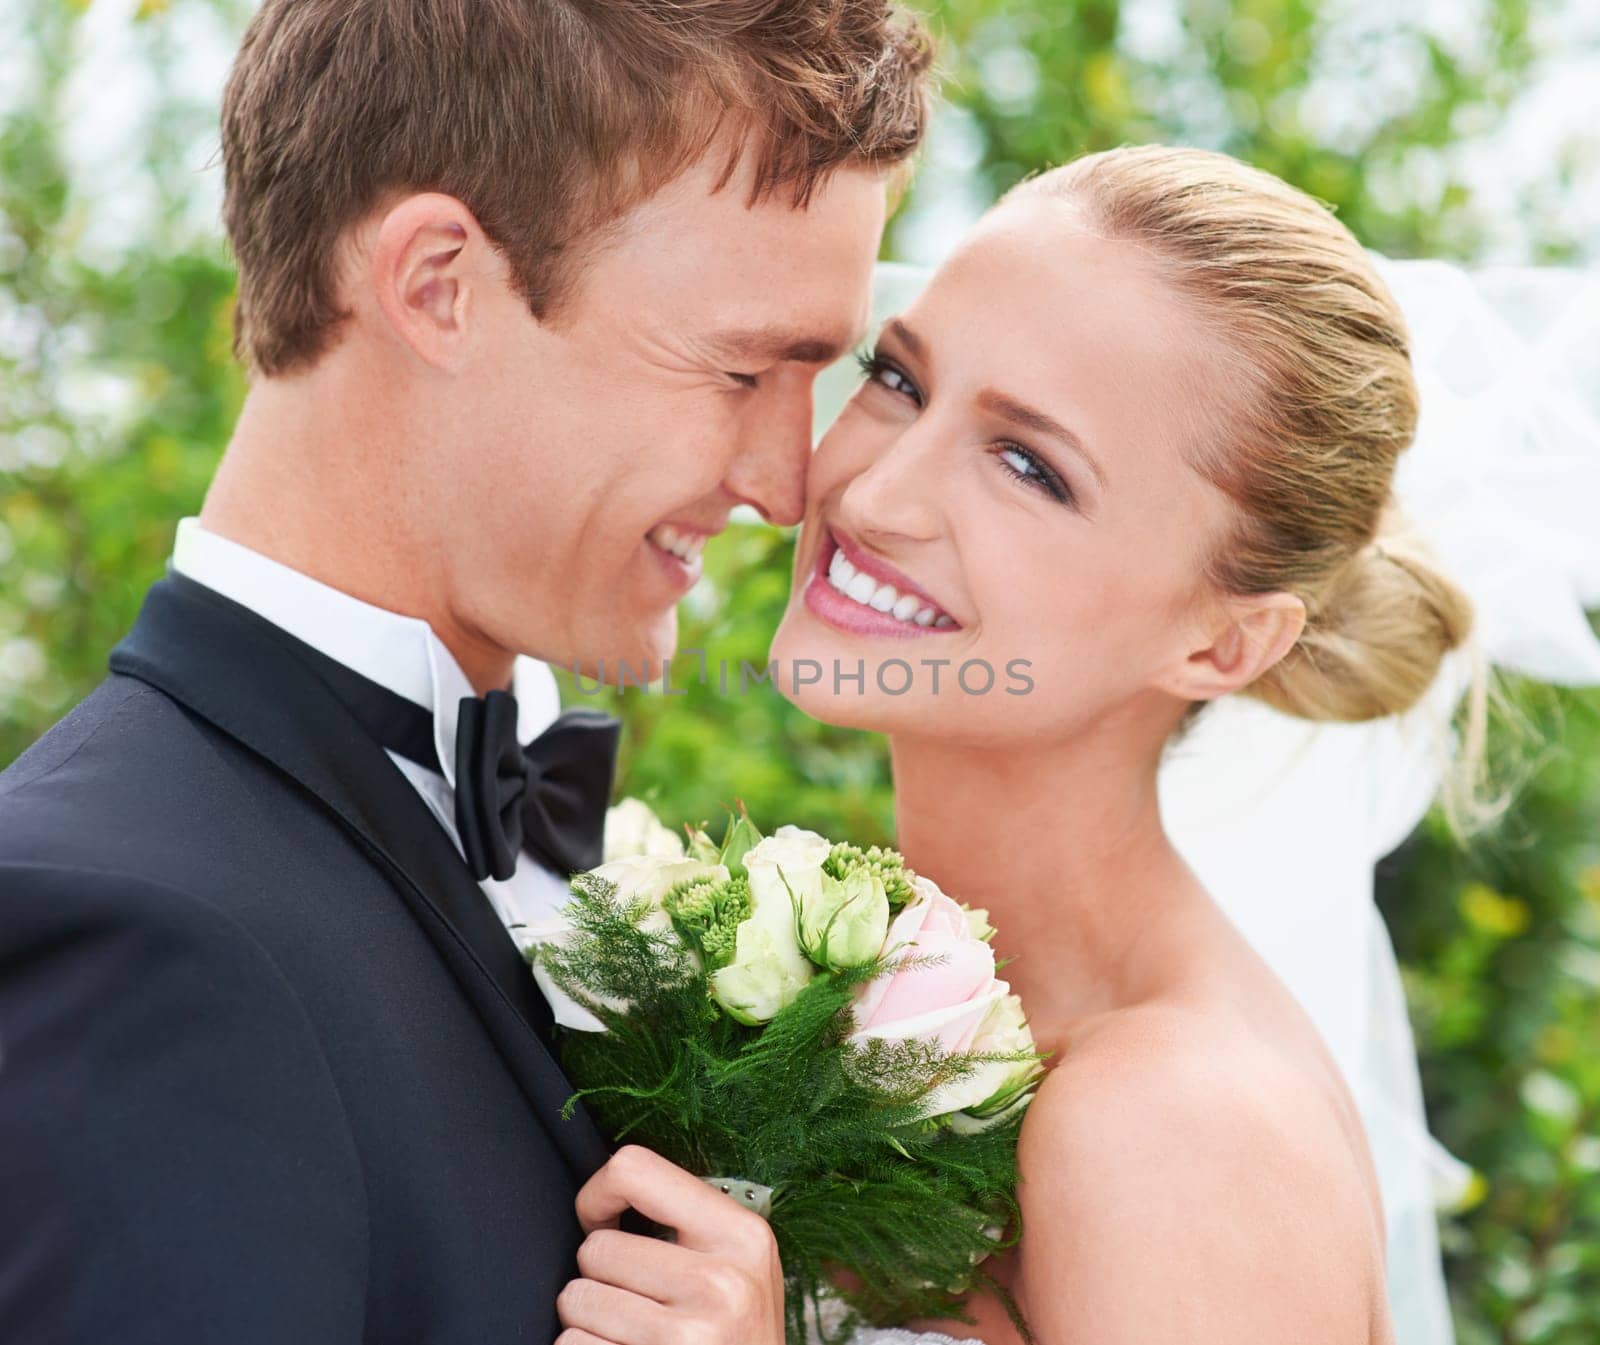 Couple, happy and affection at wedding celebration in outdoors, together and smiling in nature. Bride, portrait and commitment to relationship with marriage, love and romance at outside ceremony.